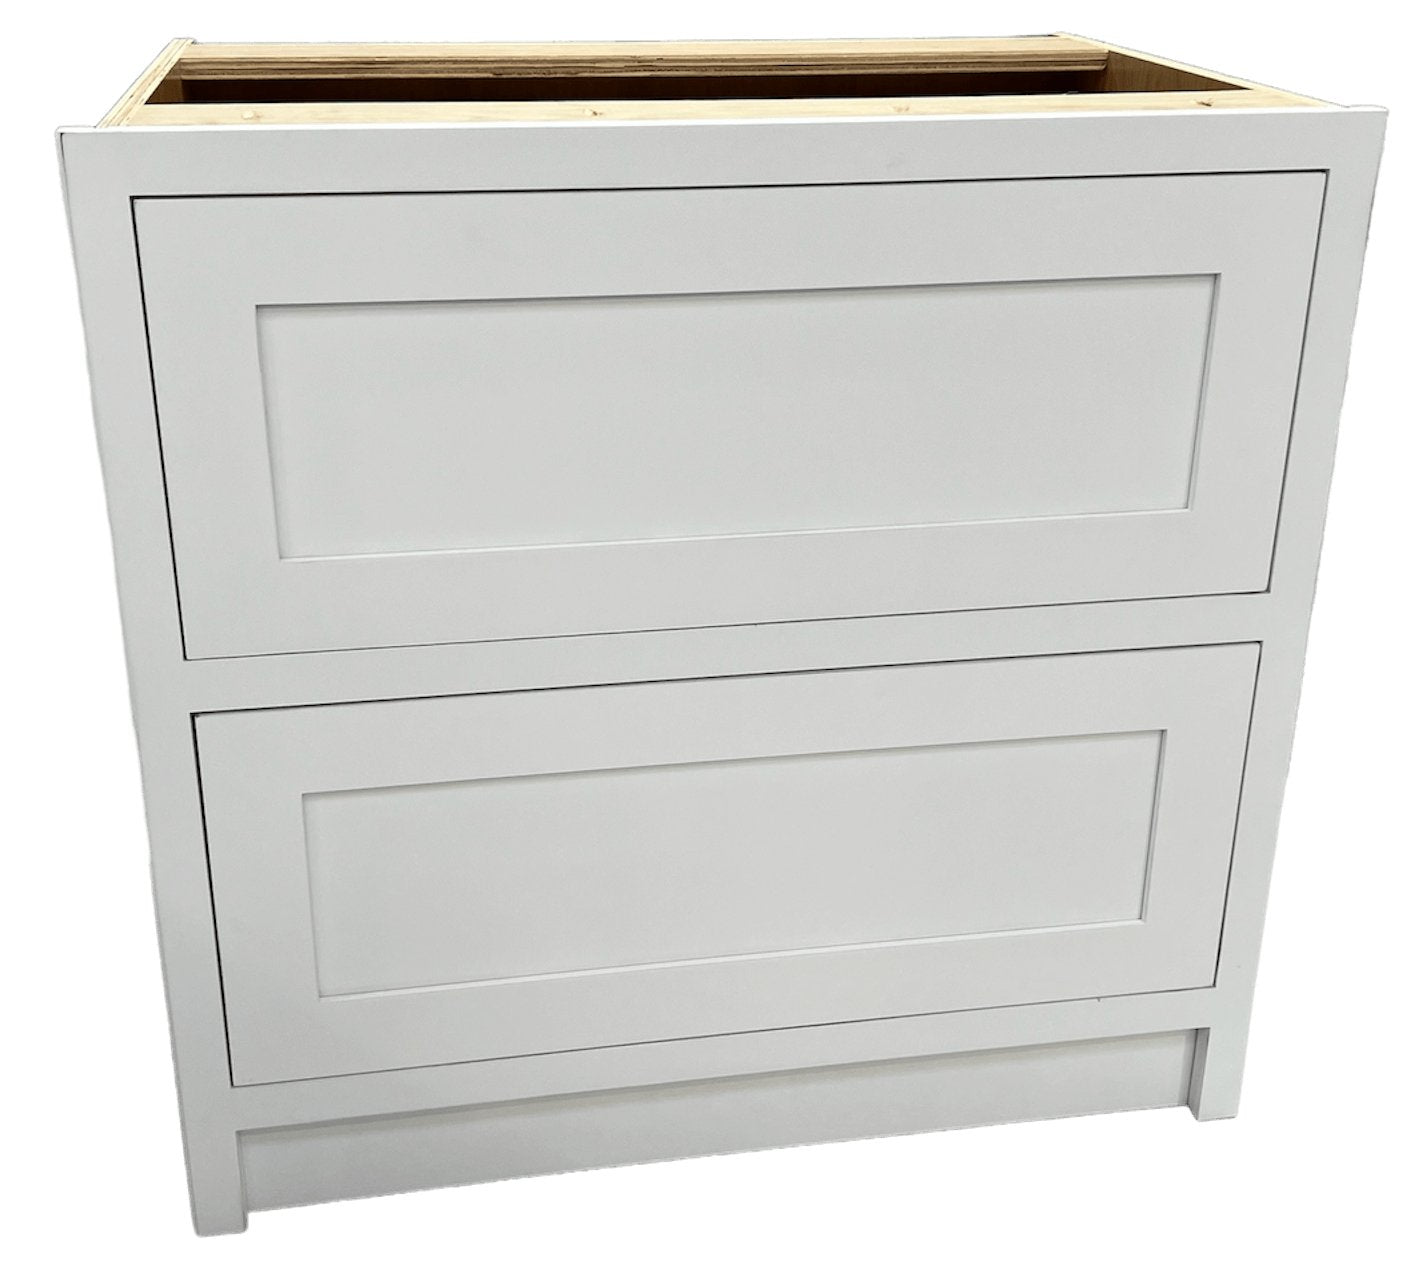 BD2 1000 - 1000mm Wide 2 Drawer plus a hidden internal drawer - Classic Kitchens Direct